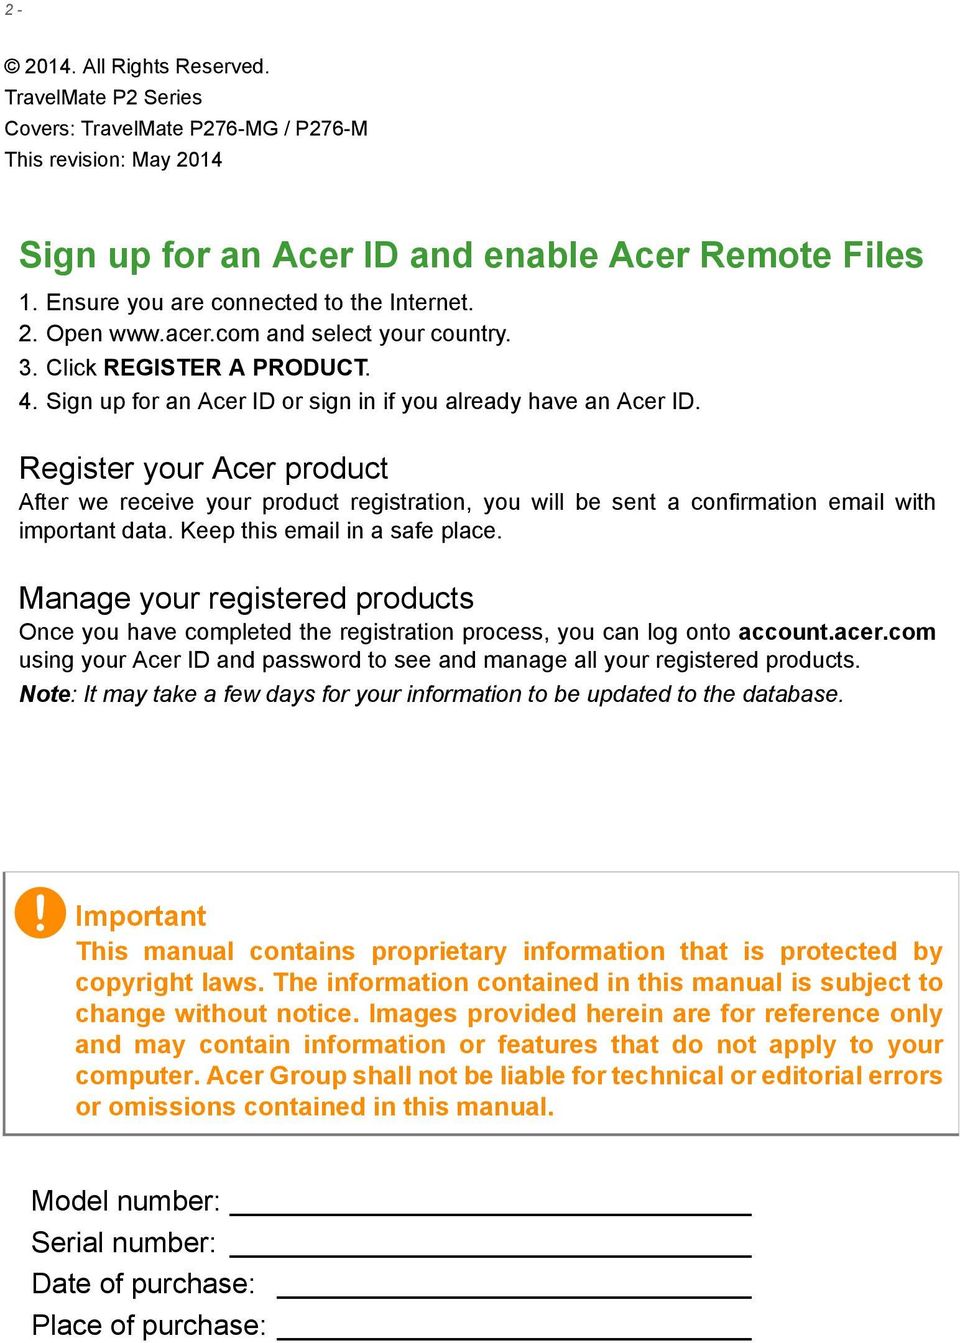 Register your Acer product After we receive your product registration, you will be sent a confirmation email with important data. Keep this email in a safe place.